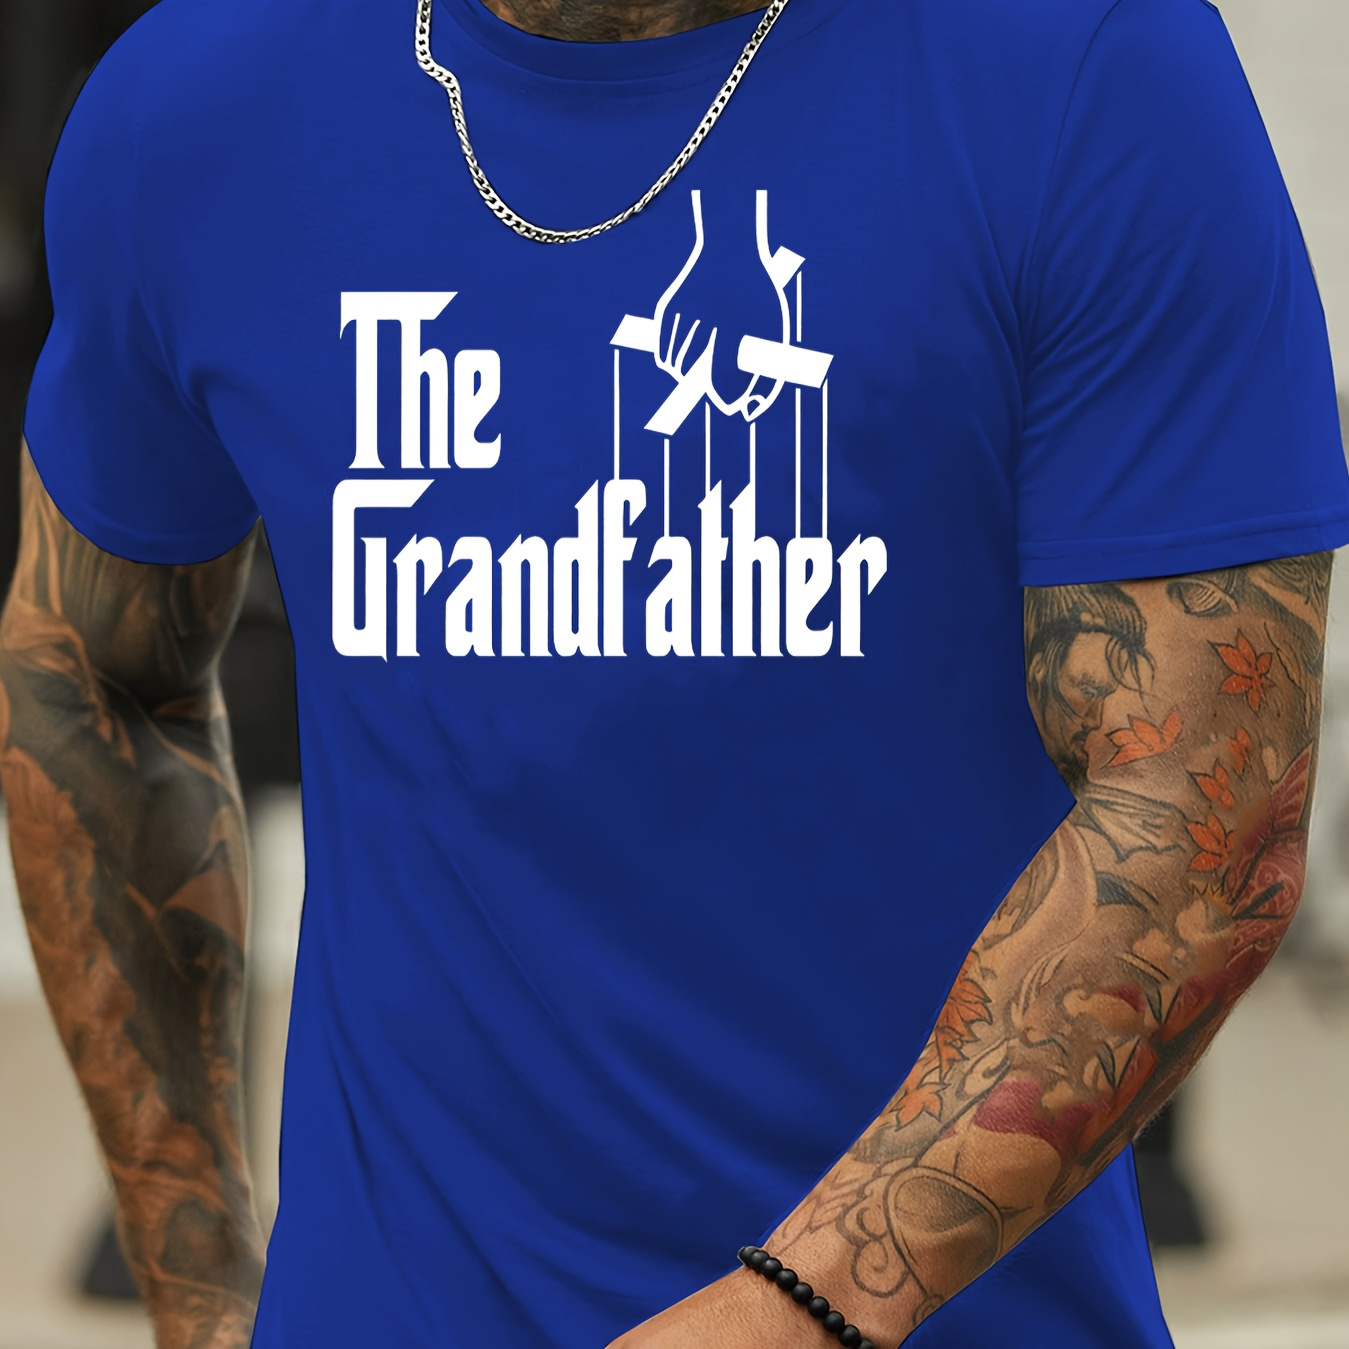 

Men's Casual Short Sleeve, Stylish T-shirt With " The Grandfather " Creative Print, Summer Fashion Top, Crew Neck Tee-shirt For Male